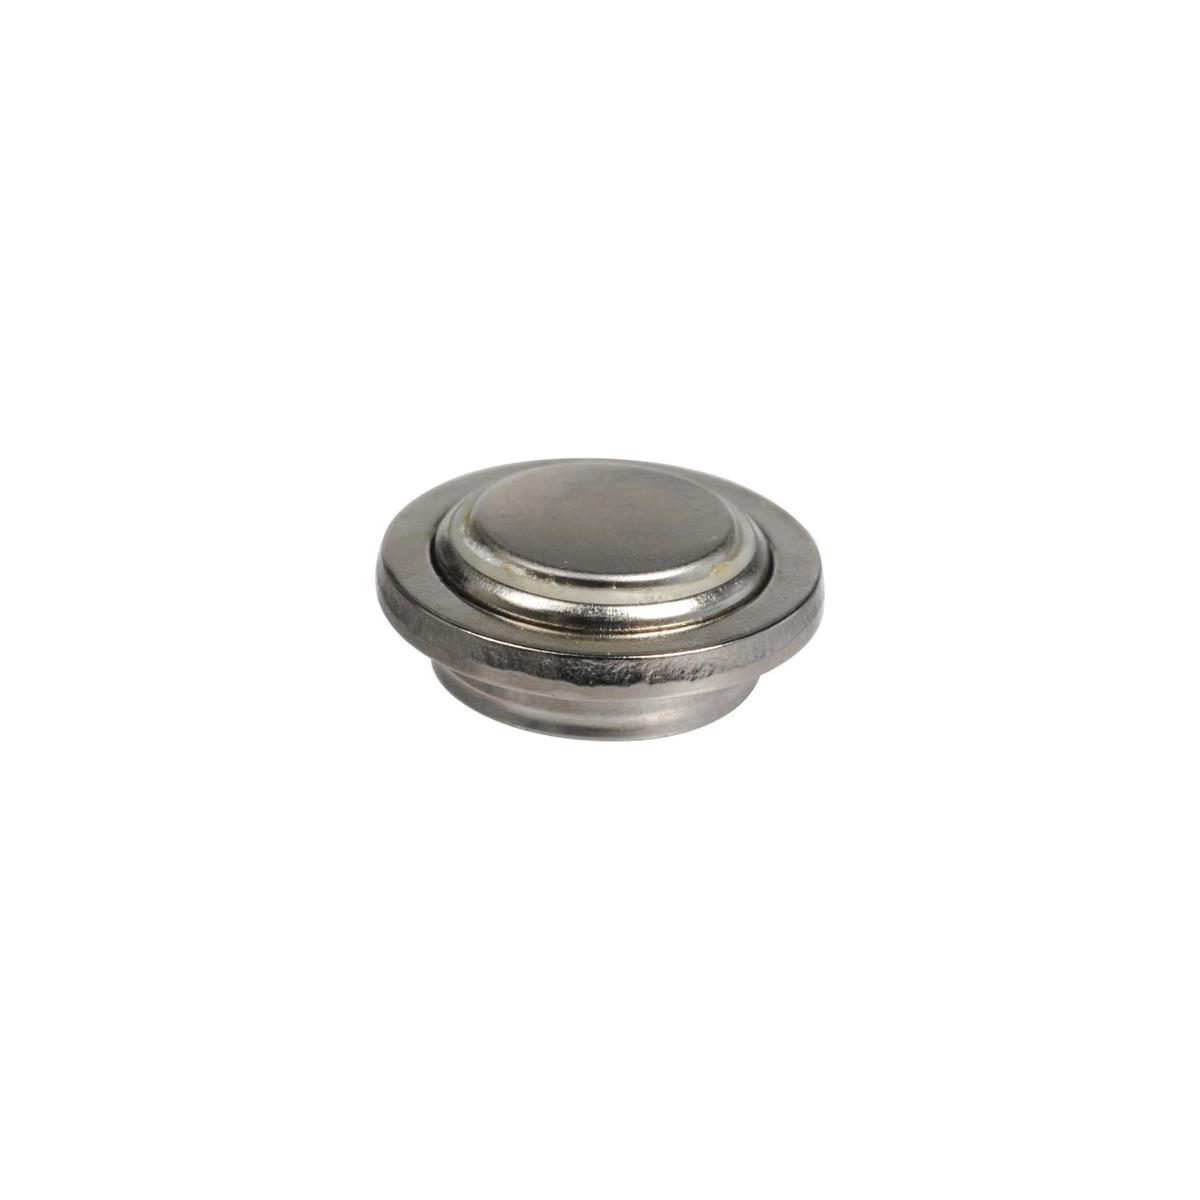 Image of Wein Cell Cell PX625/PX13 1.35V Zinc-Air Button Battery